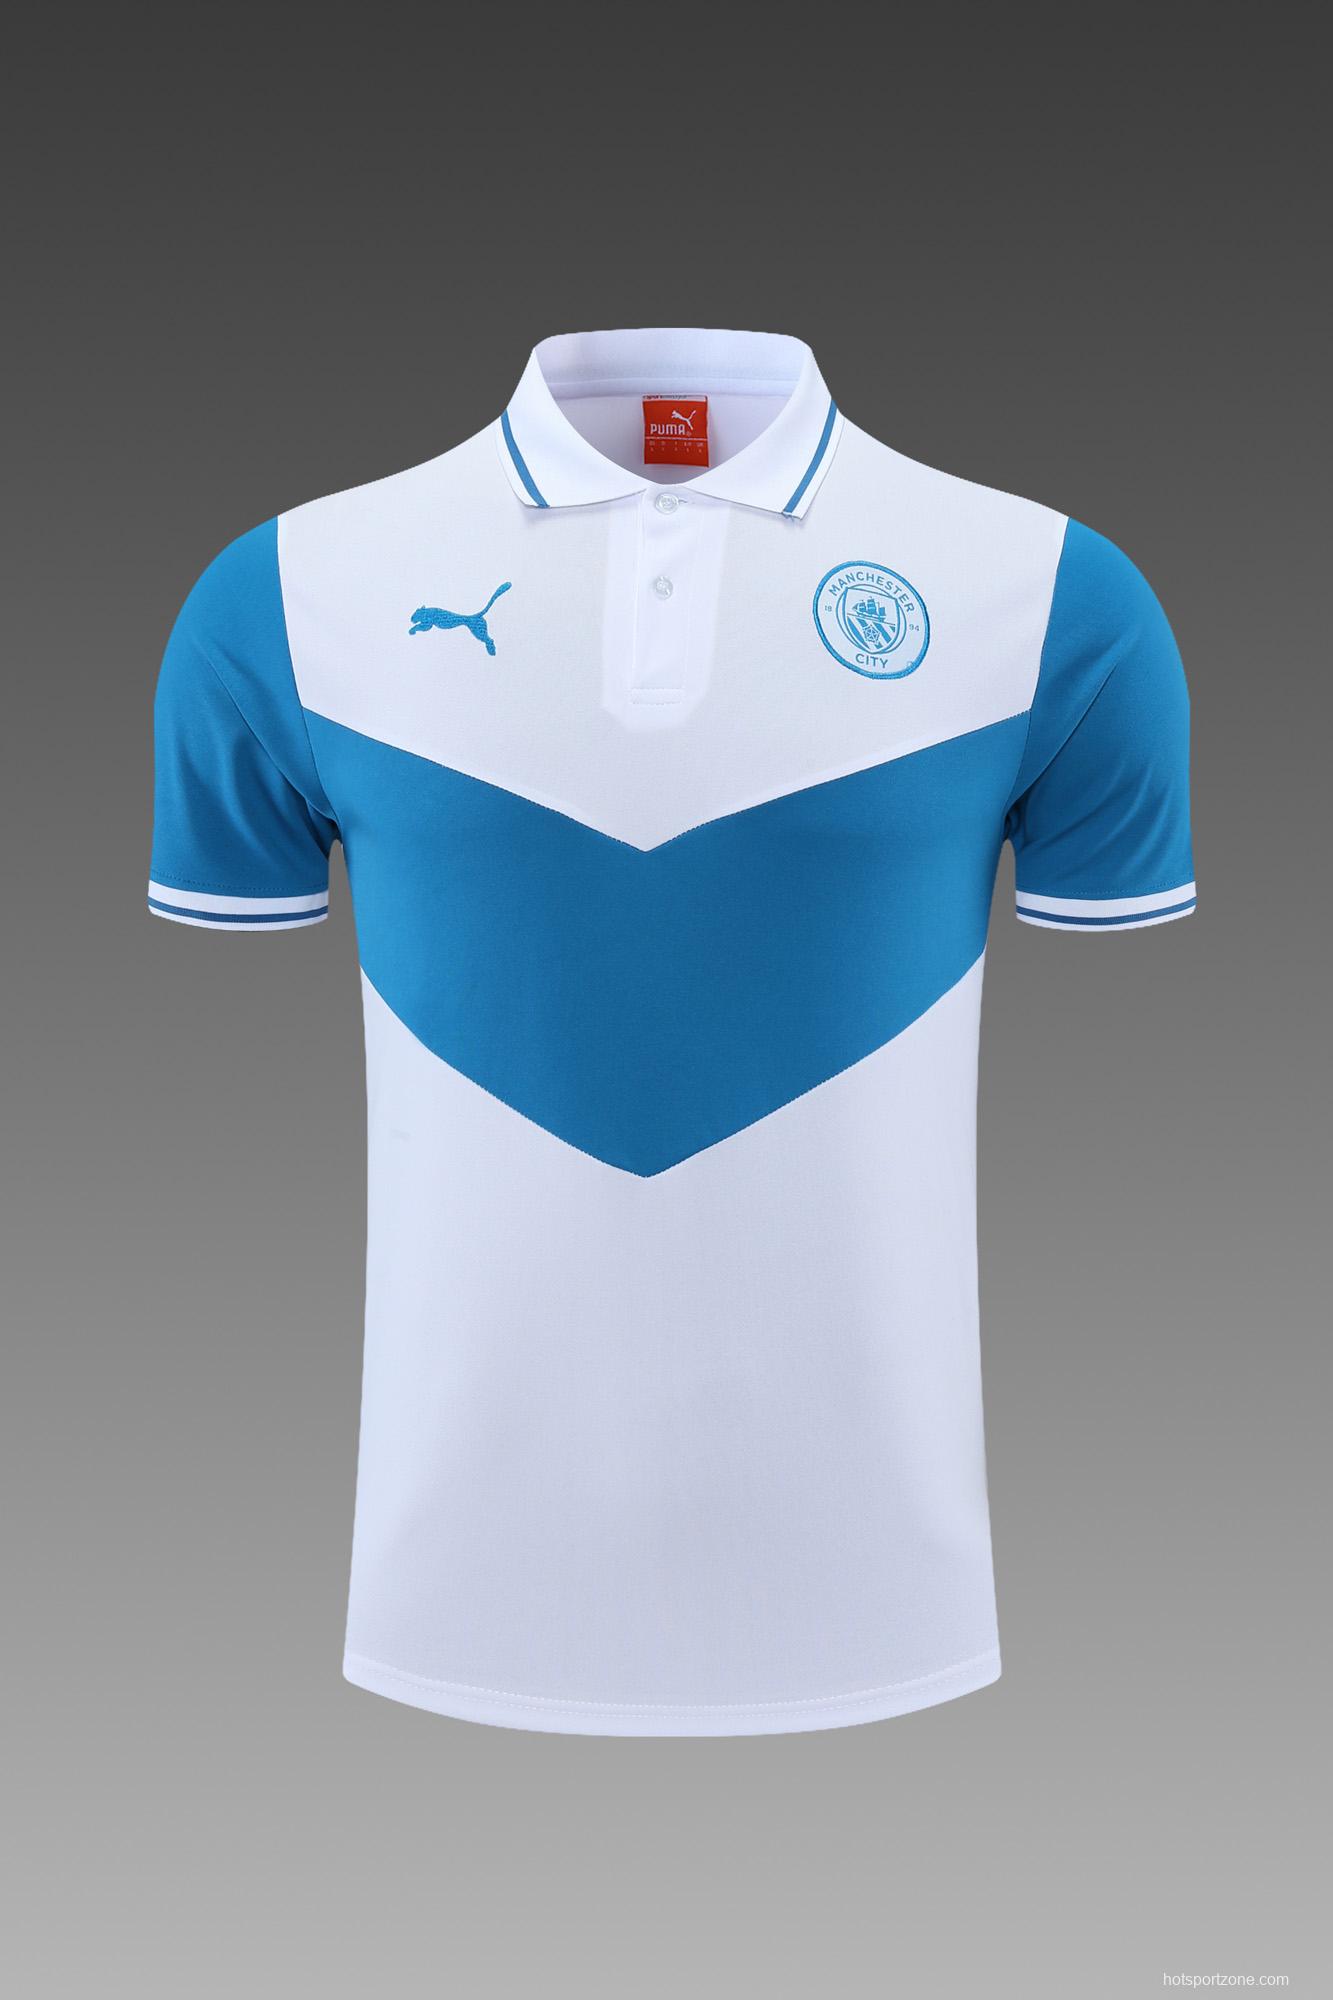 Manchester City POLO kit White and Blue Stripes(not supported to be sold separately)